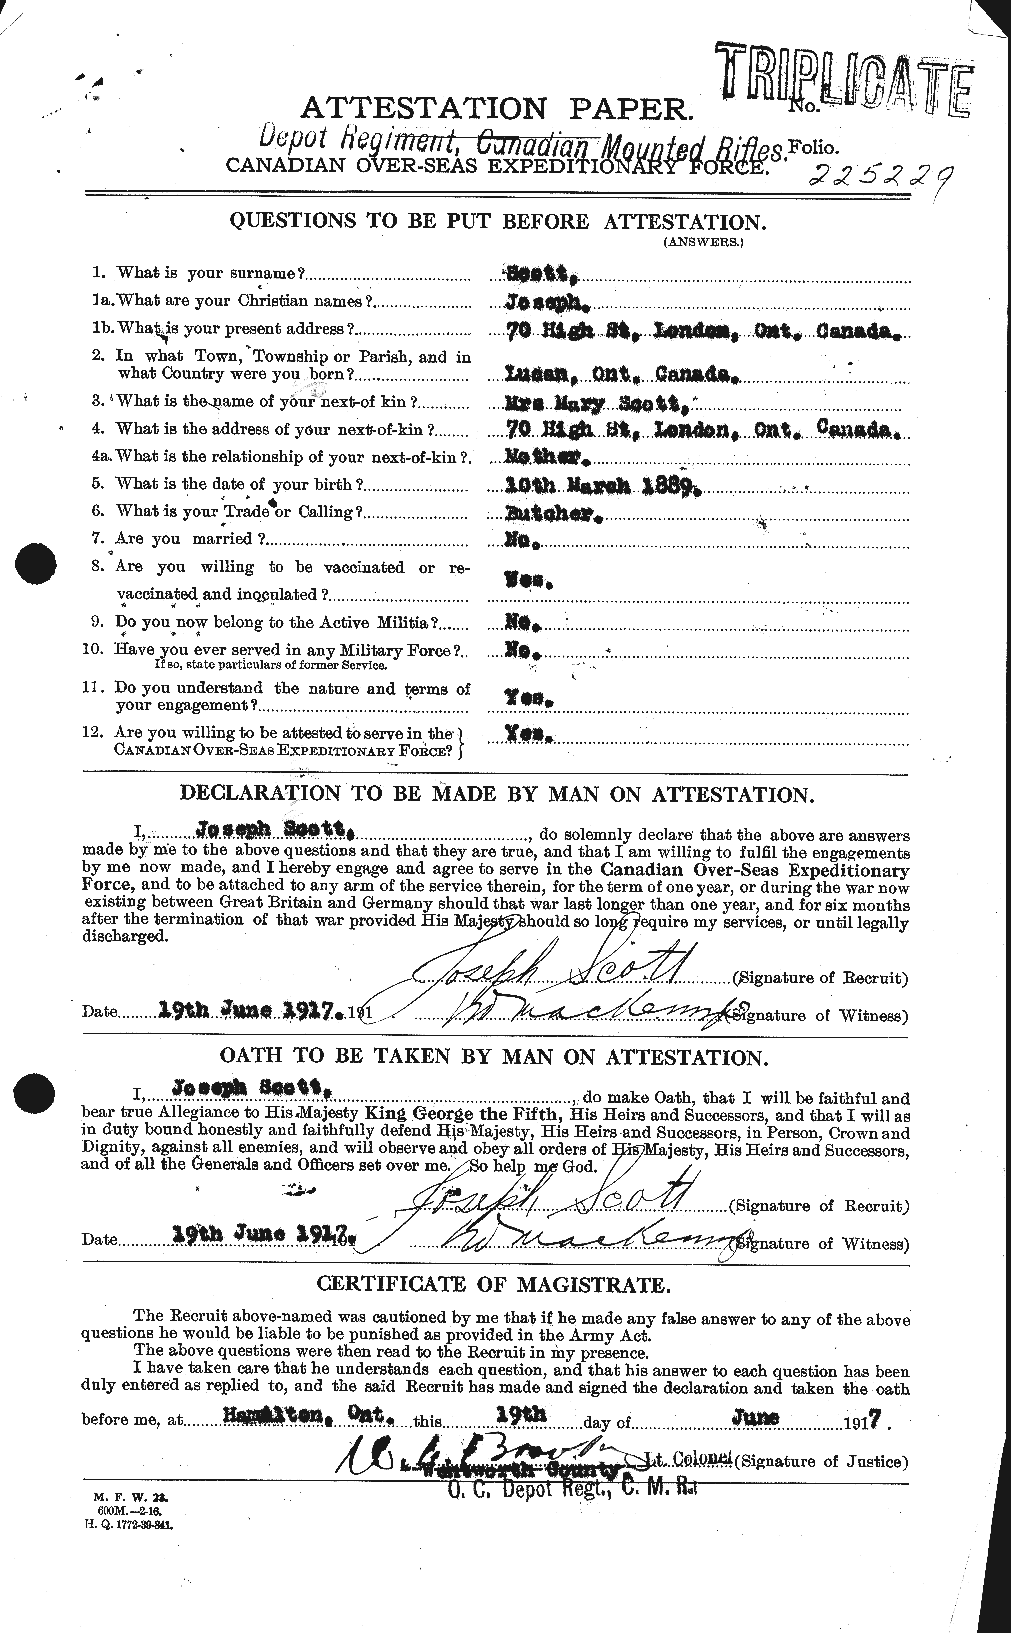 Personnel Records of the First World War - CEF 084172a